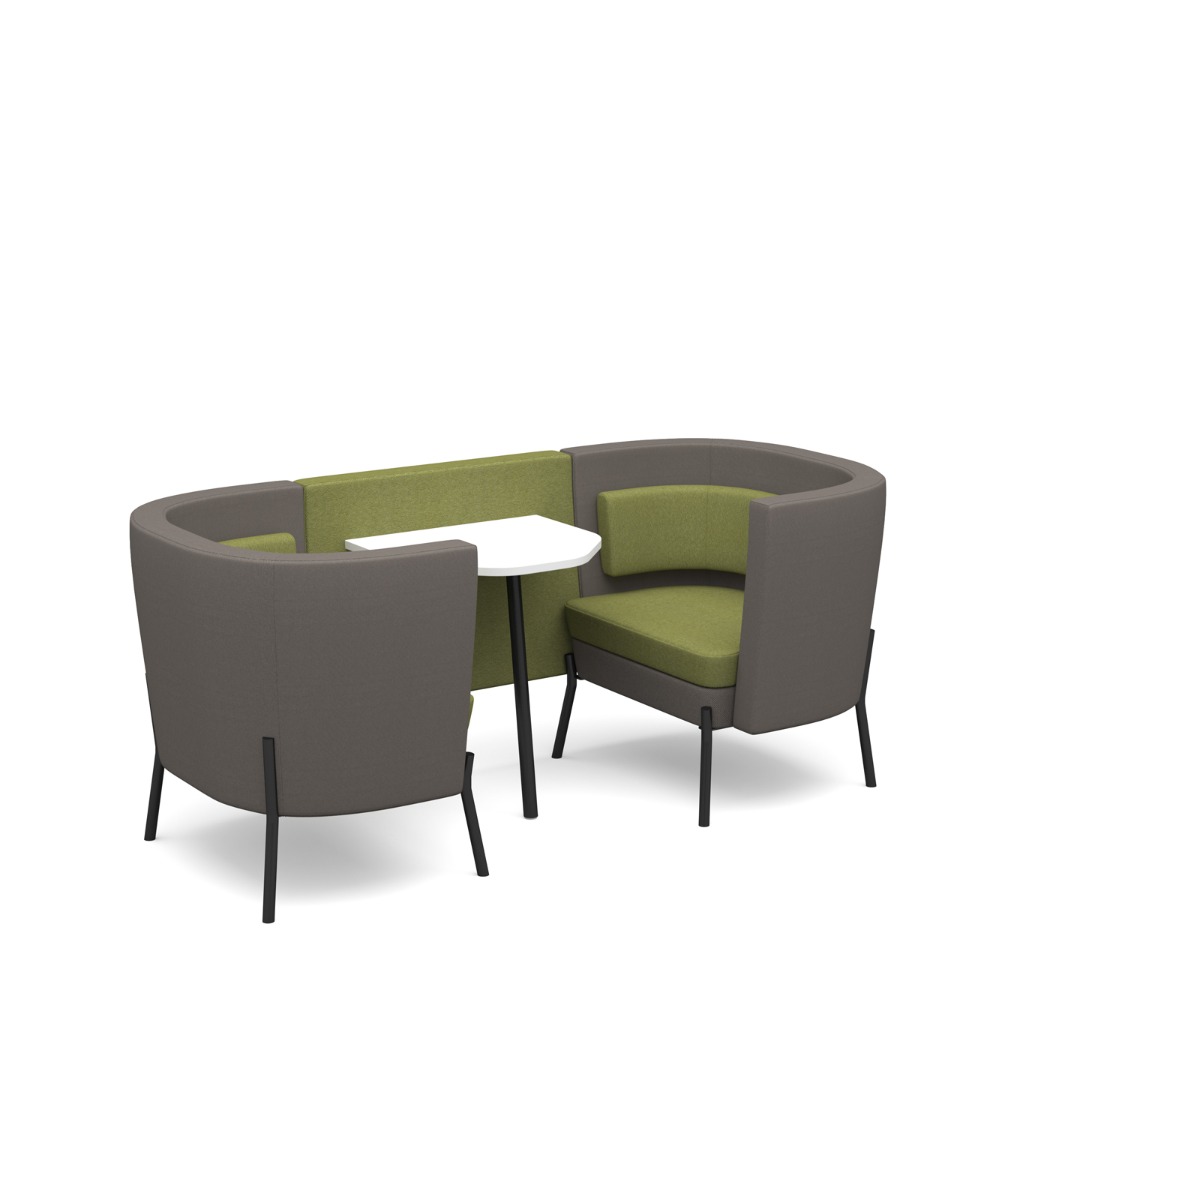 Dams Tilly 2 Seater Low Back Breakout Meeting Pod with Table 